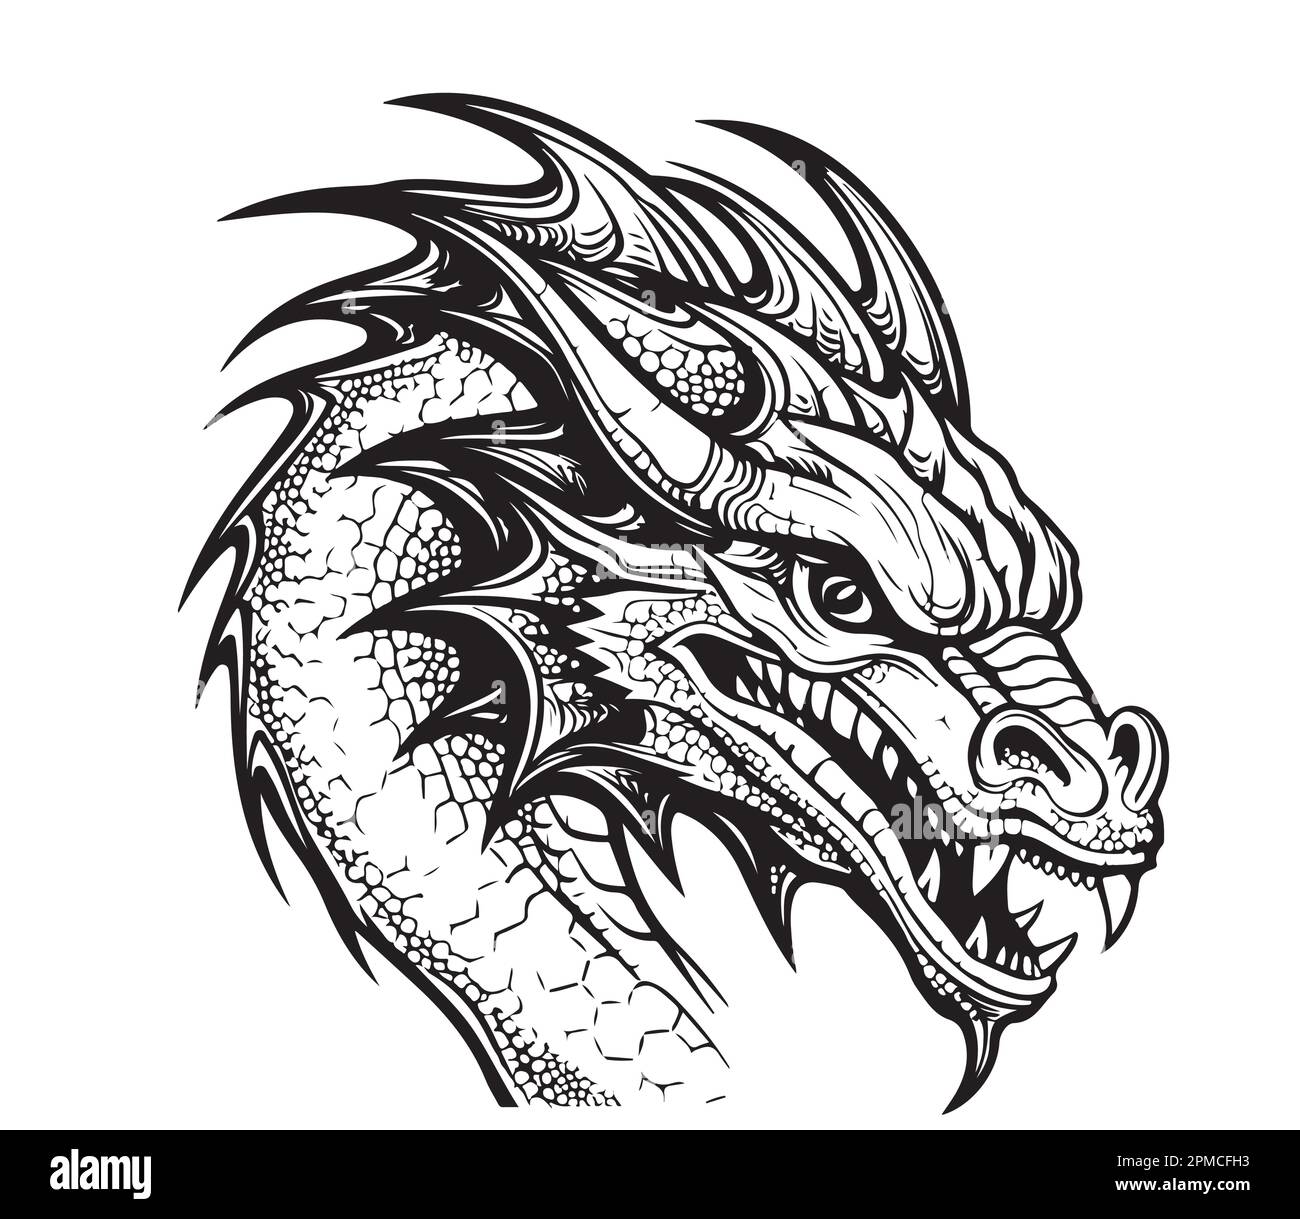 Face of a fantasy dragon sketch illustration Myths and legends Stock Vector